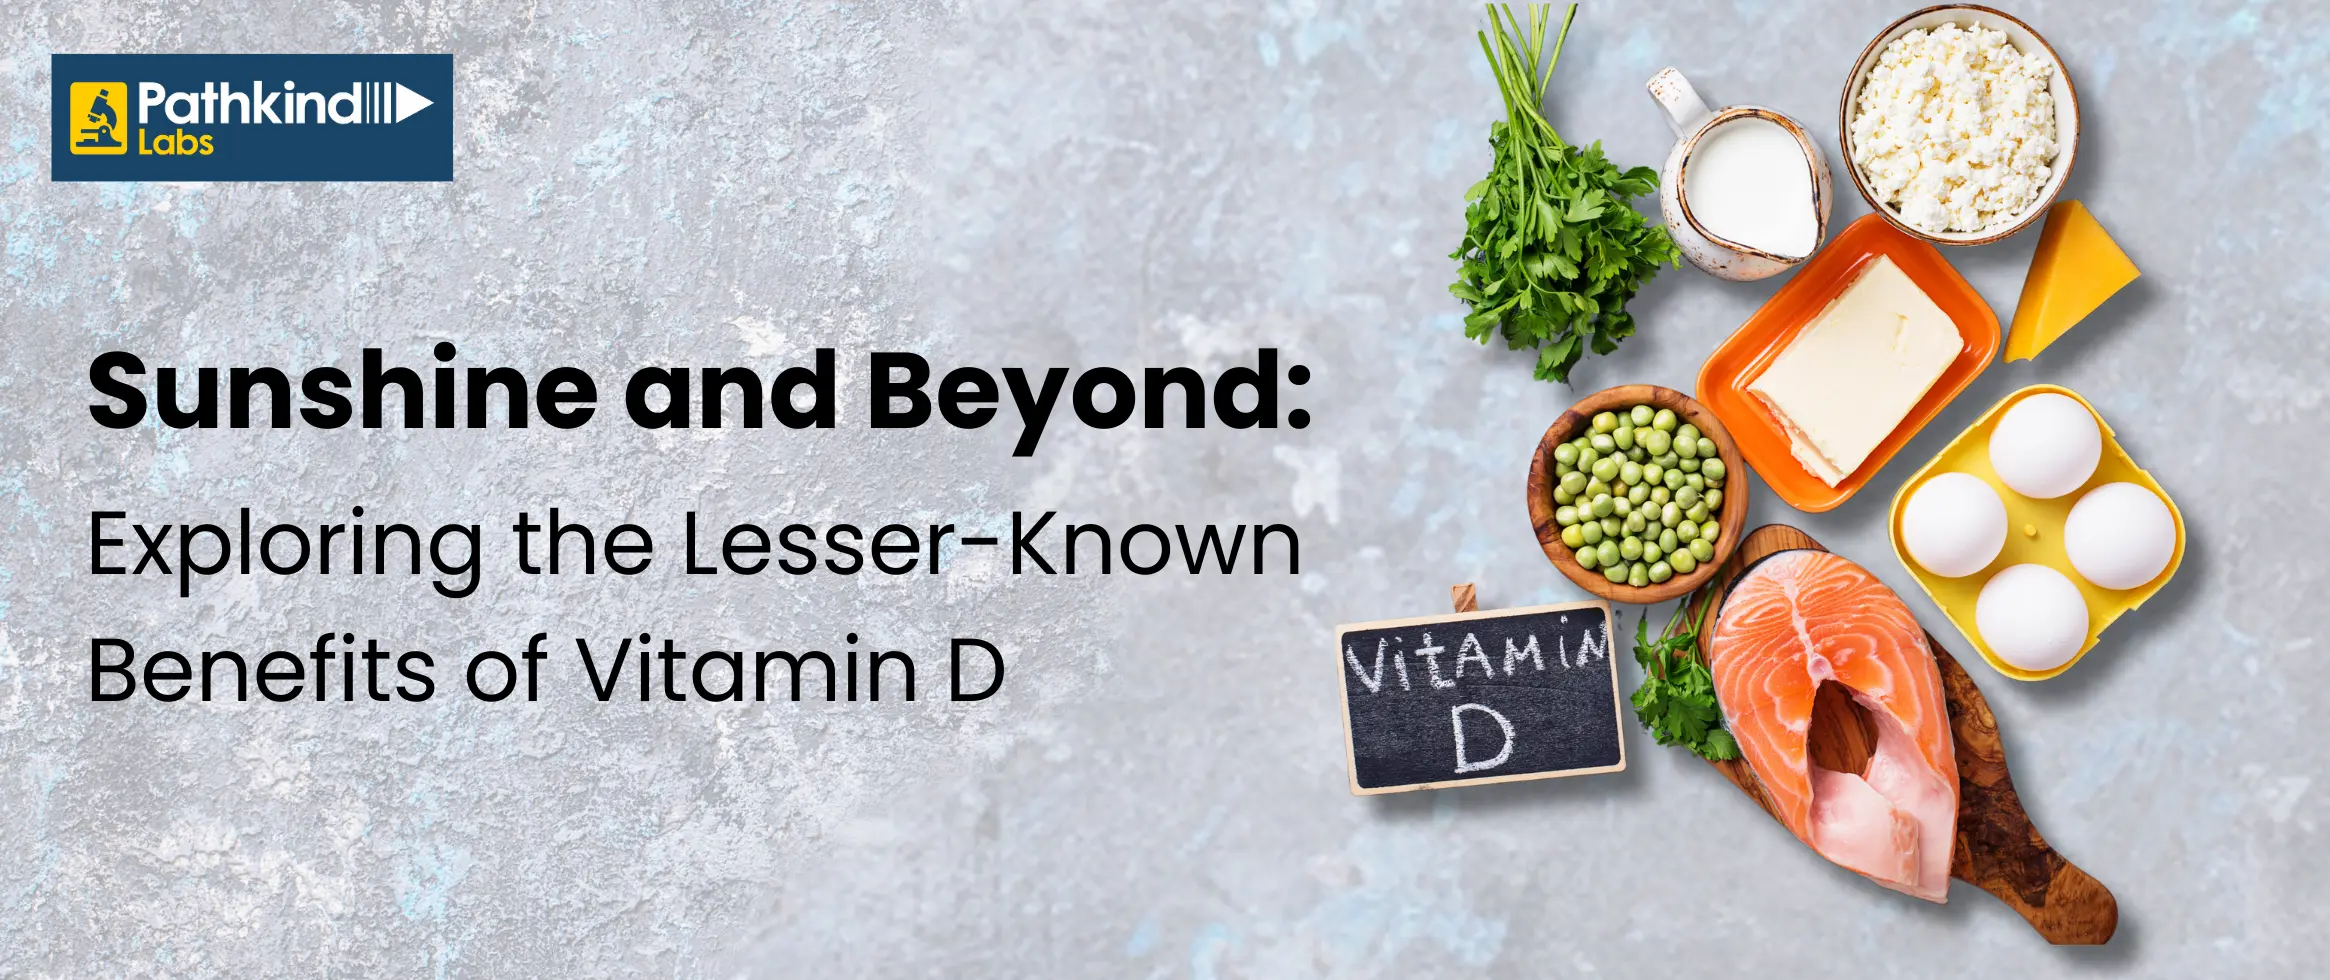  Sunshine and Beyond: Exploring the Lesser-Known Benefits of Vitamin D